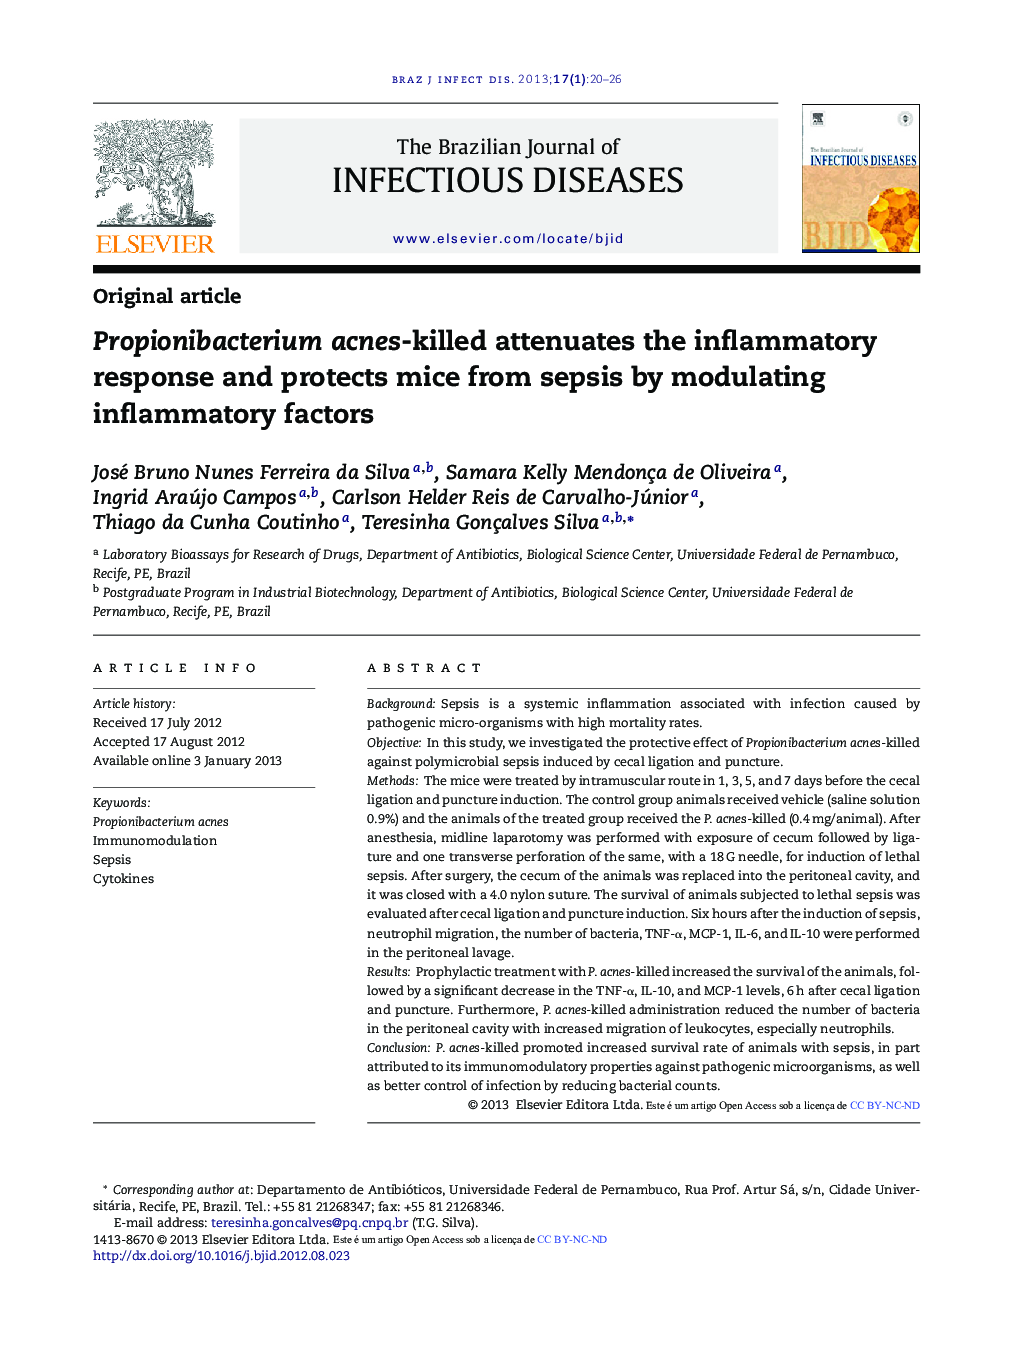 Propionibacterium acnes-killed attenuates the inflammatory response and protects mice from sepsis by modulating inflammatory factors